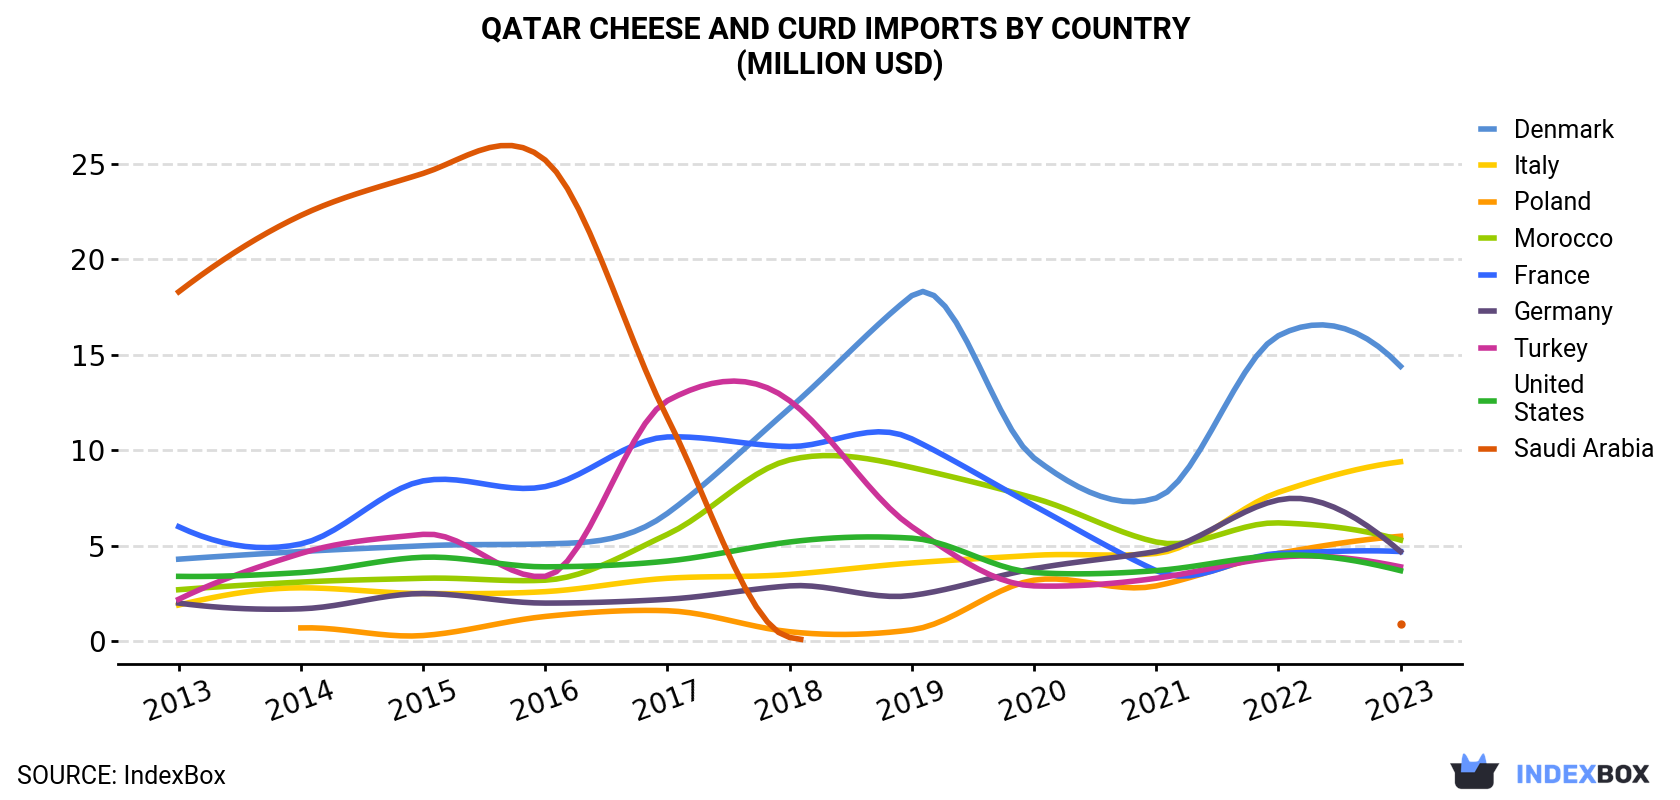 Qatar Cheese and Curd Imports By Country (Million USD)